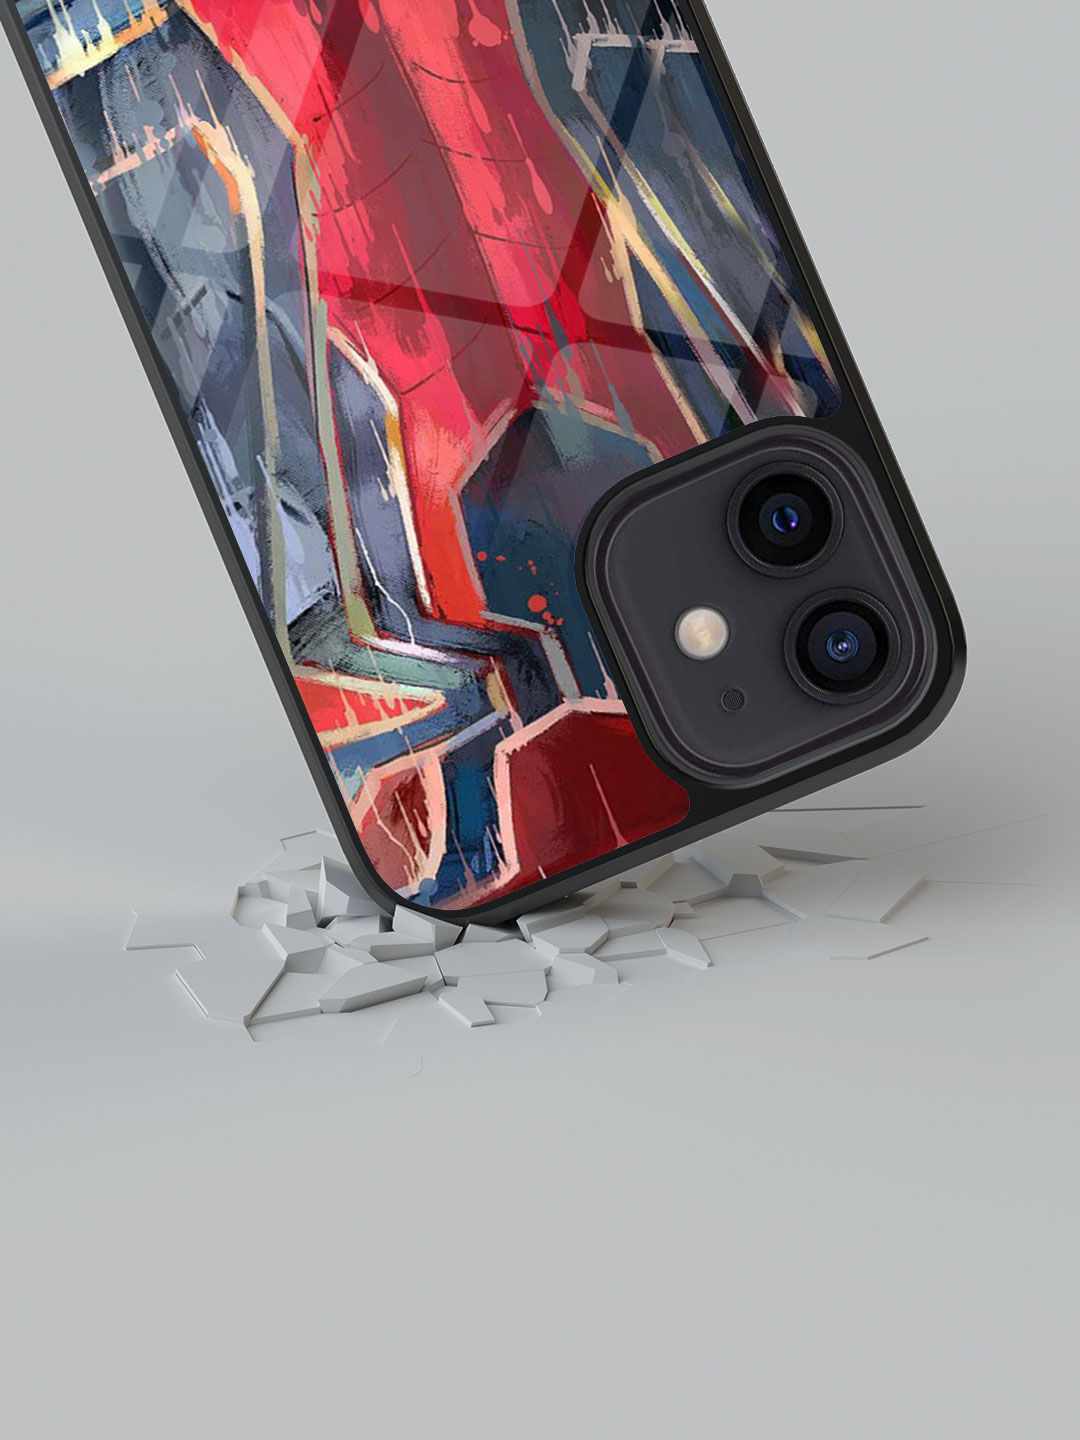 Grunge Suit Spidey - Glass Case For iPhone 12 Mini